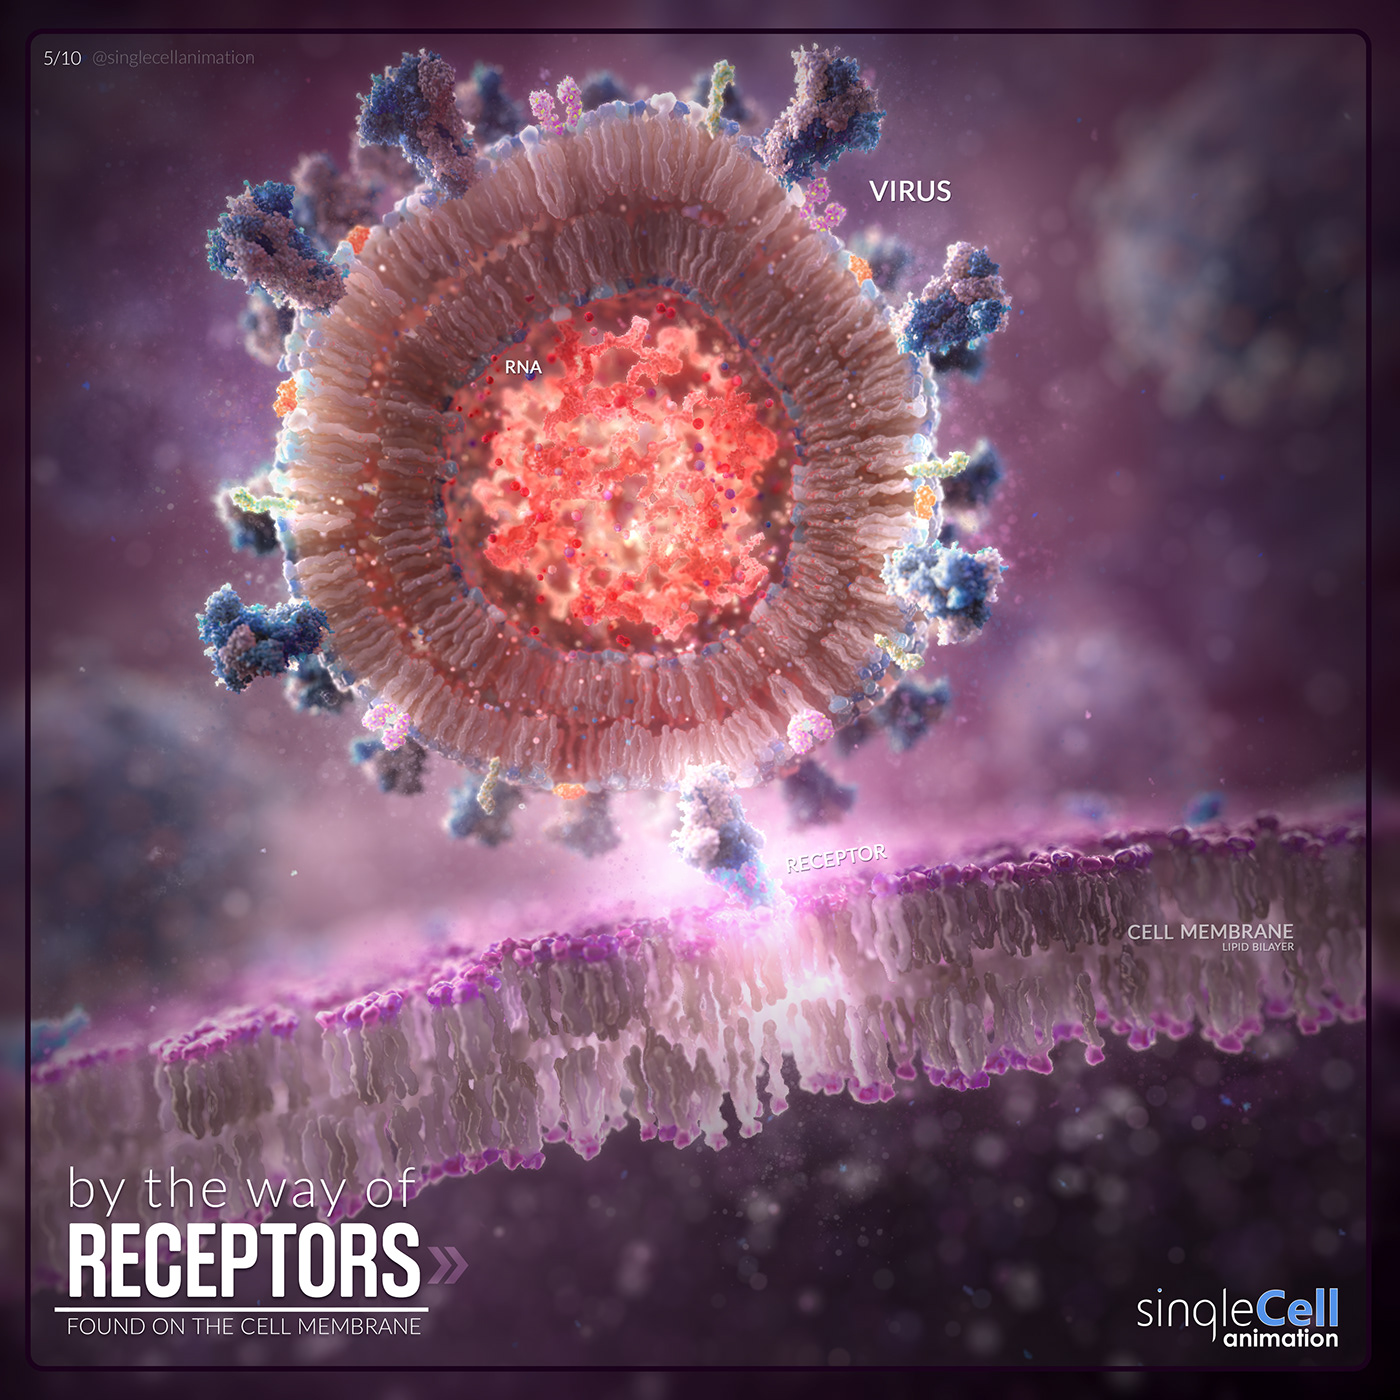 the virus binds by the way of receptors found on the cell membrane.